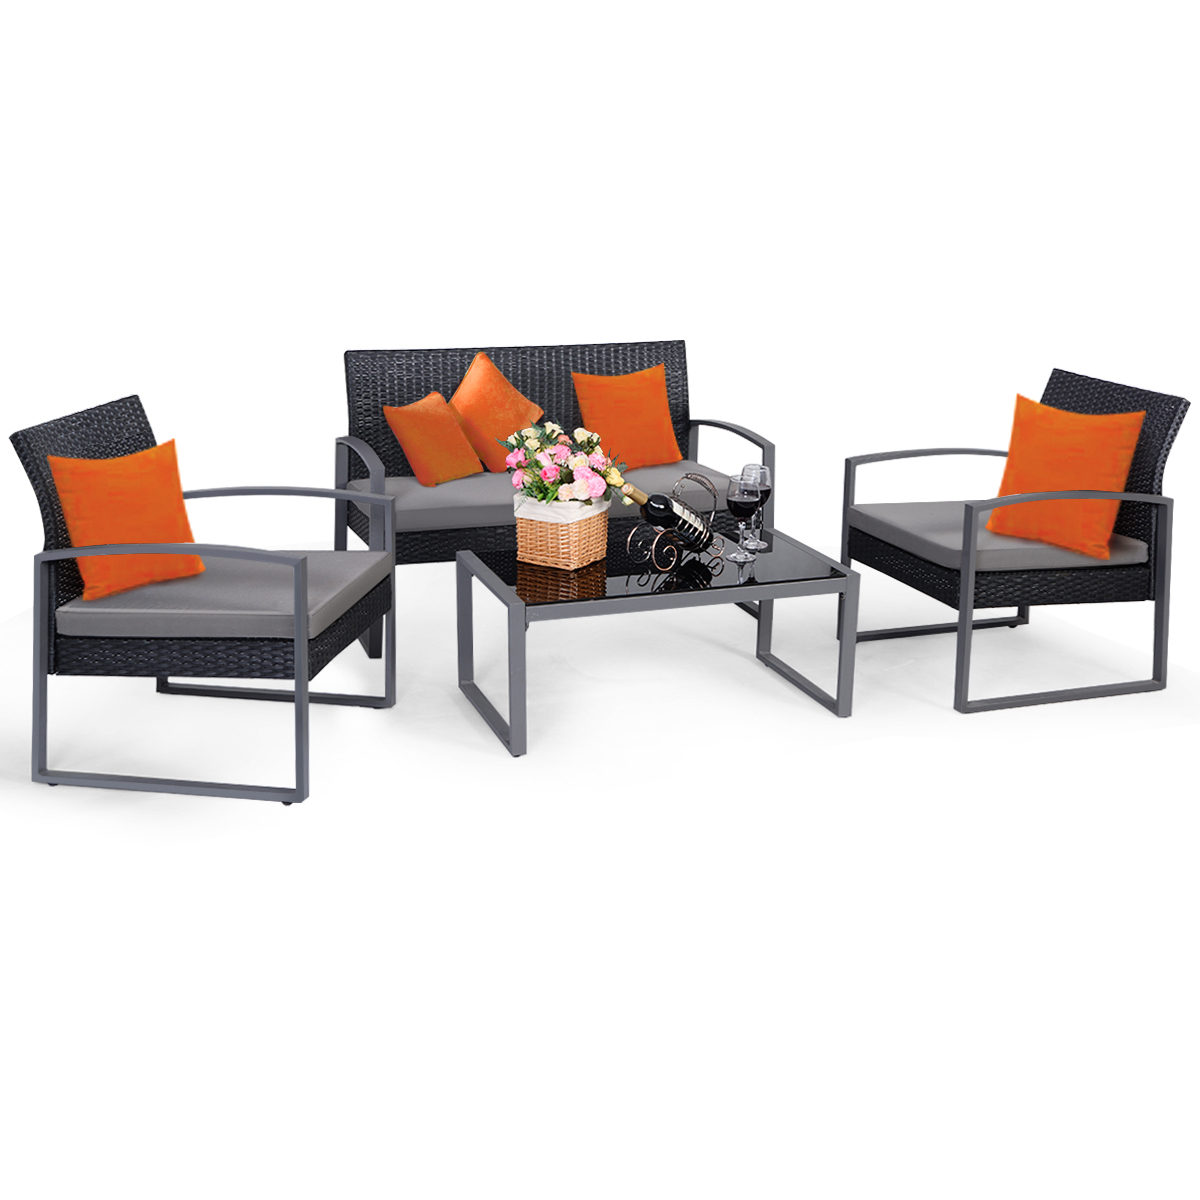 Patiojoy Outdoor Wicker 4 Pieces Conversation Set PE Rattan Chairs and Table - image 3 of 8